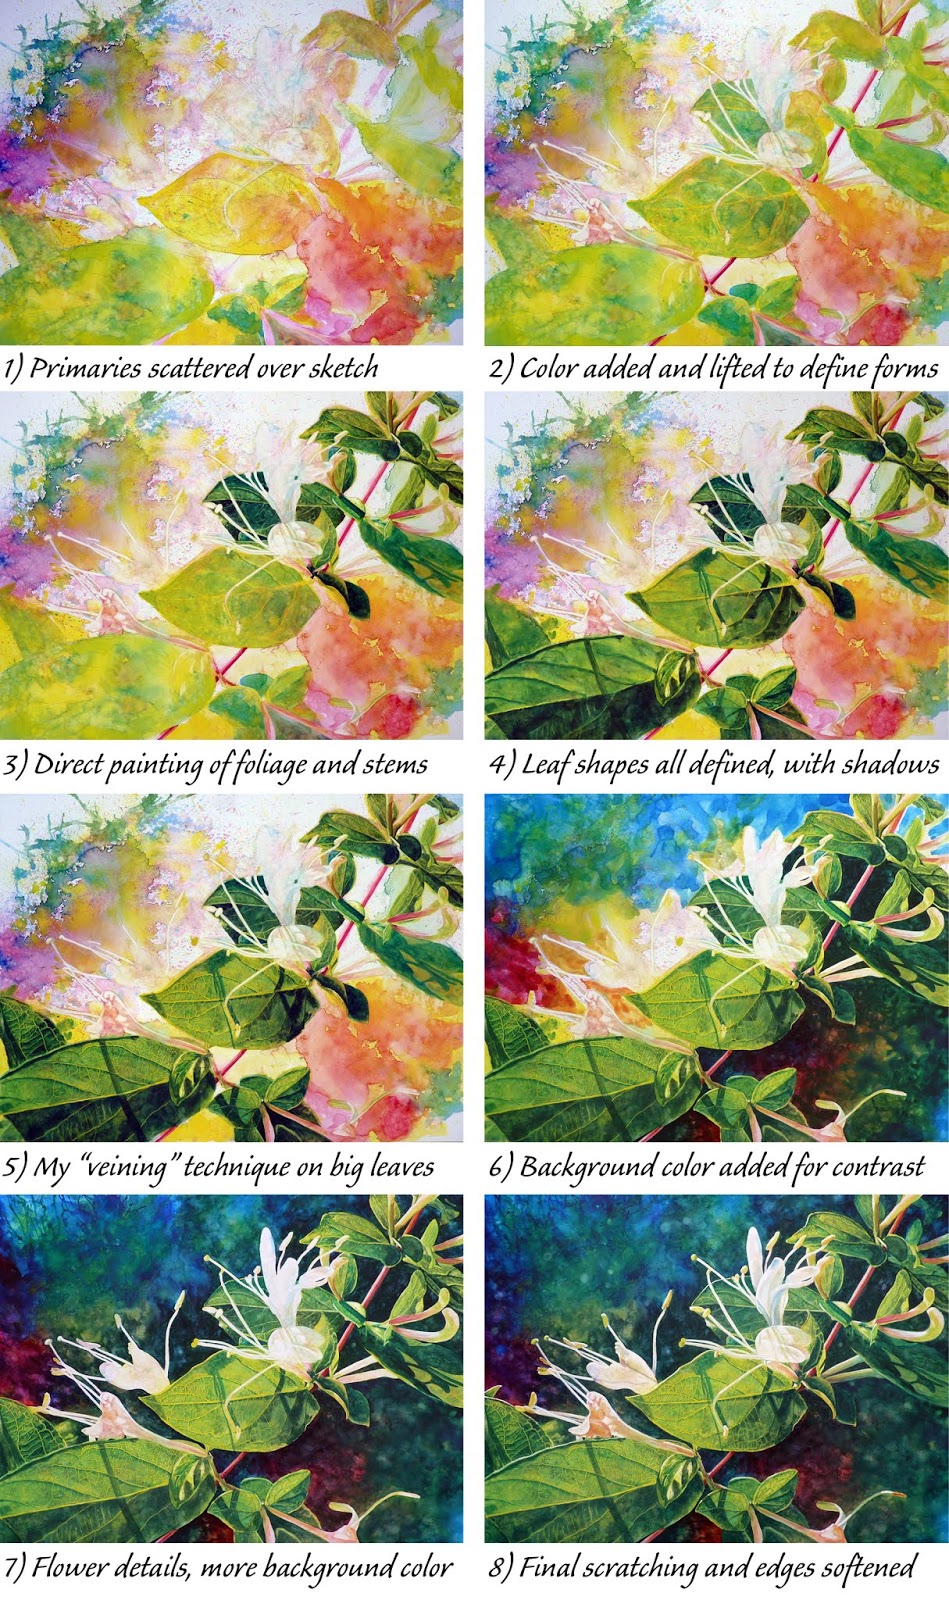 Sample of Aquabord painting process by Judy Lavoie on "Honeysuckle"